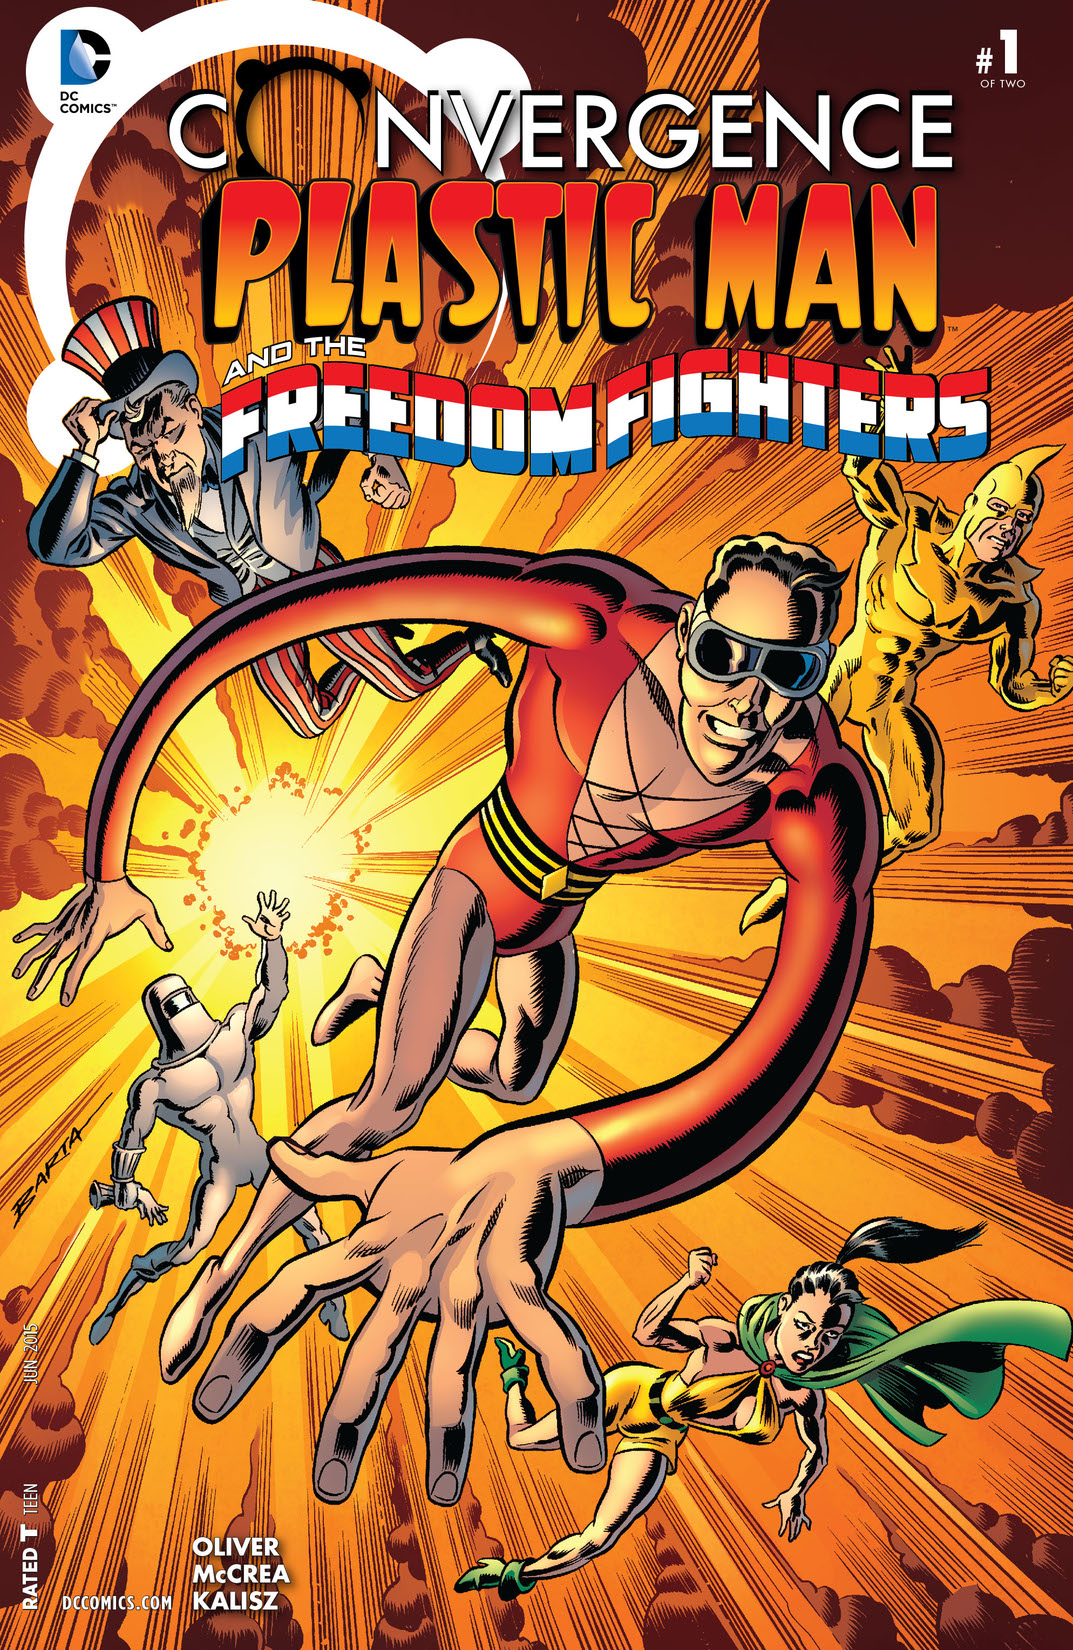 Convergence: Plastic Man and the Freedom Fighters #1 preview images